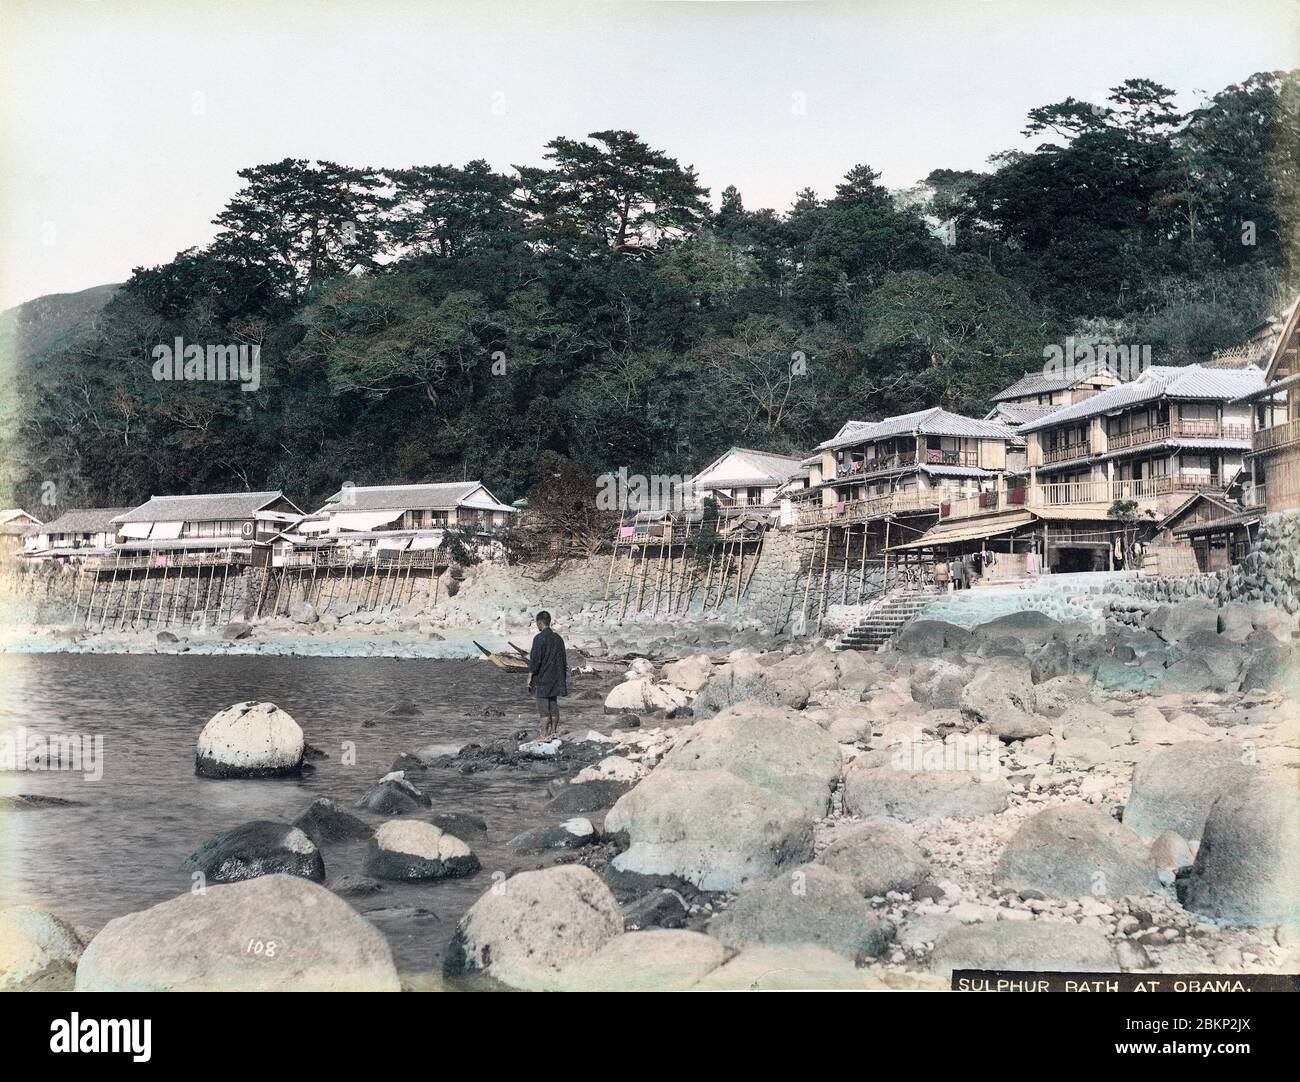 [ 1890s Japan - Inns at Japanese Hot Spring Village ] —   Ryokan (Japanese inns) at Obama Onsen (spa), in Nagasaki Prefecture, ca. 1880s. It was formerly part of Hizen Province.  Established in 713, Obama had inns built along the narrow coast line. It became very popular during the Meiji Period. Obama still is a spa resort today and has the hottest and most active springs in Japan.  19th century vintage albumen photograph. Stock Photo